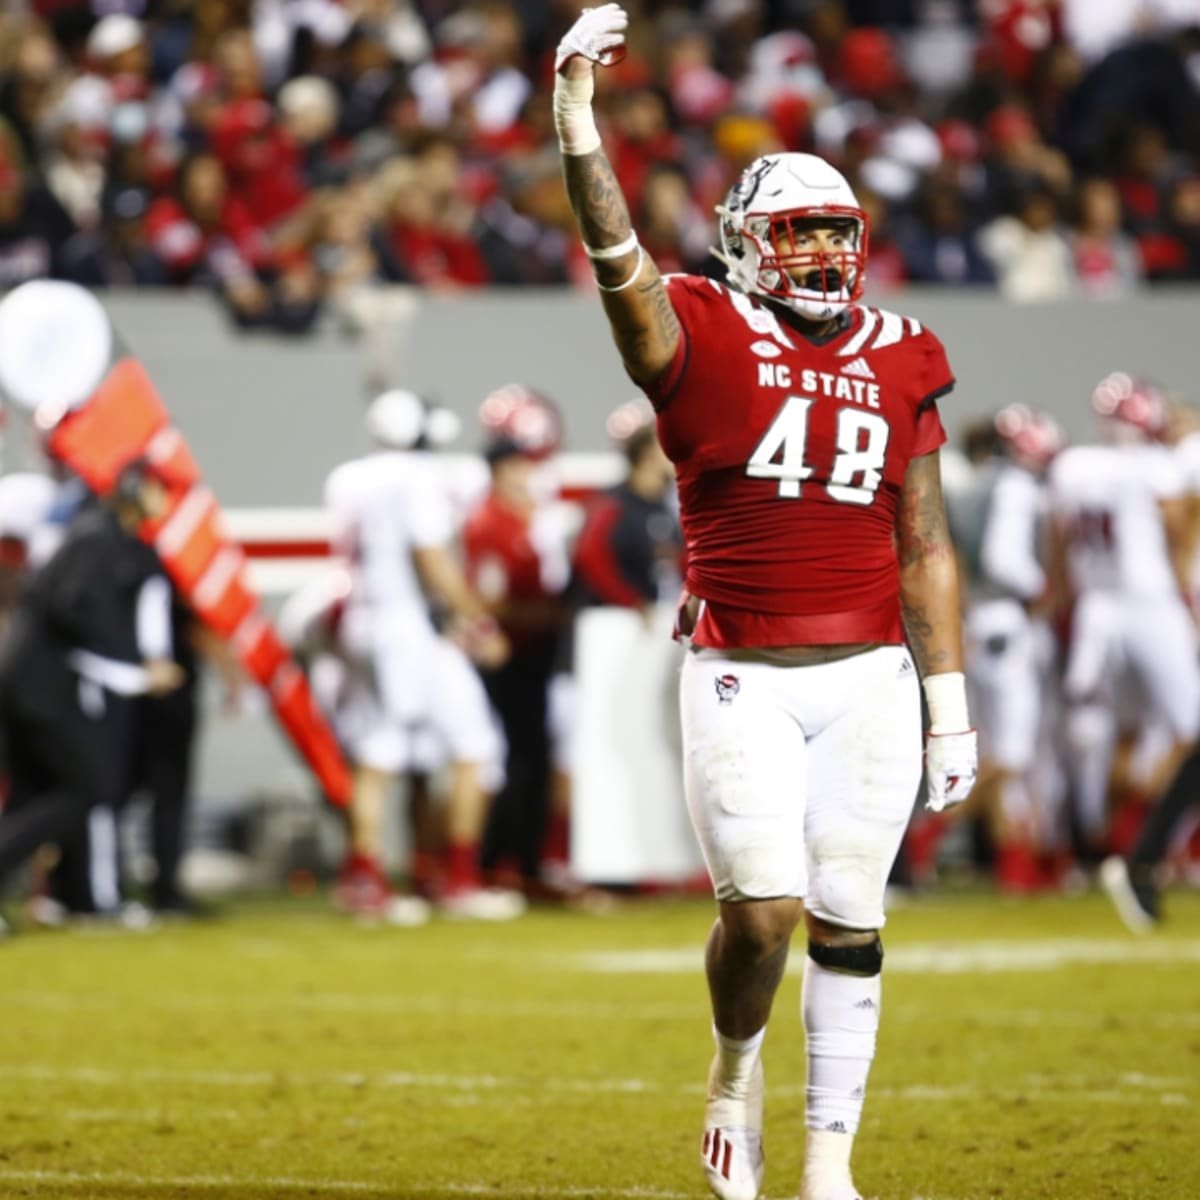 #AGTG Wow!! Blessed to receive an offer from NC State @coachwiles @DCCoachJ5 @H2_Recruiting @ChadSimmons_ @Andrew_Ivins @recruittheN